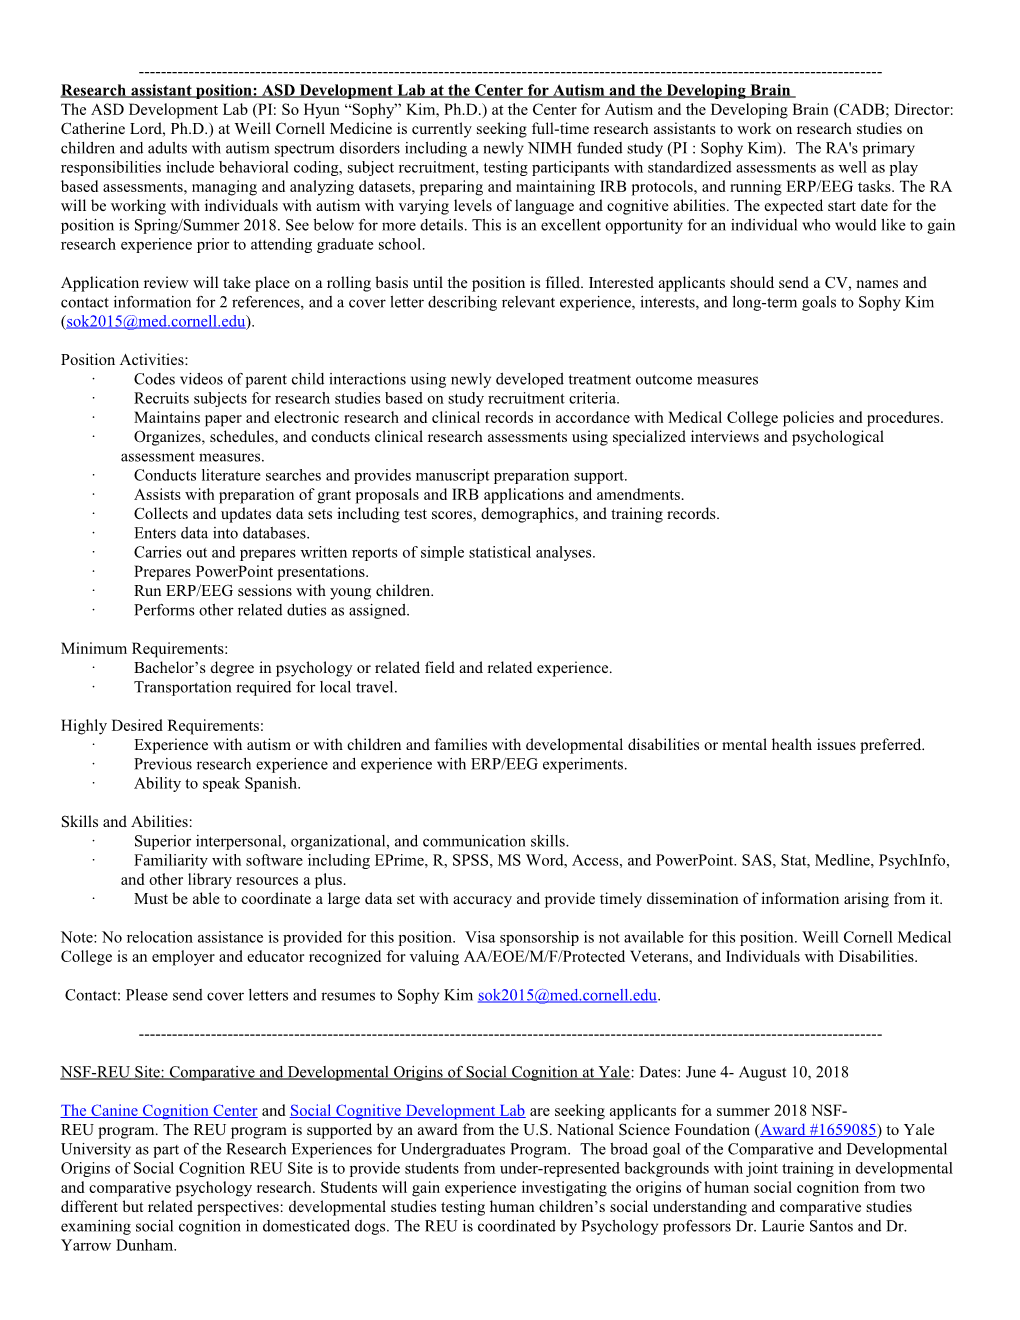 Research Assistant Position: ASD Development Lab at the Center for Autism and the Developing